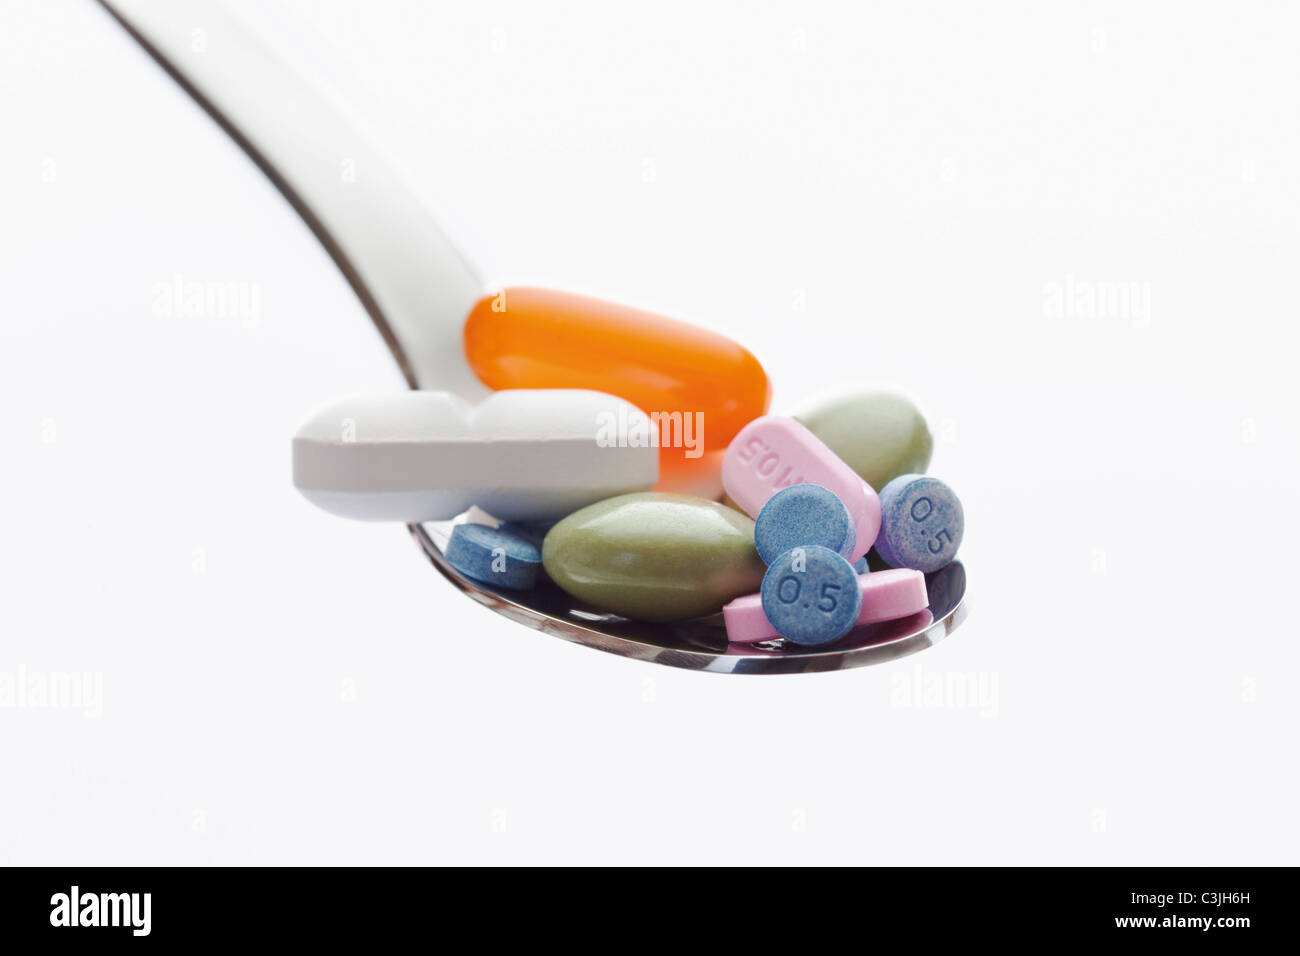 Mixed tablets in spoon against white background Stock Photo